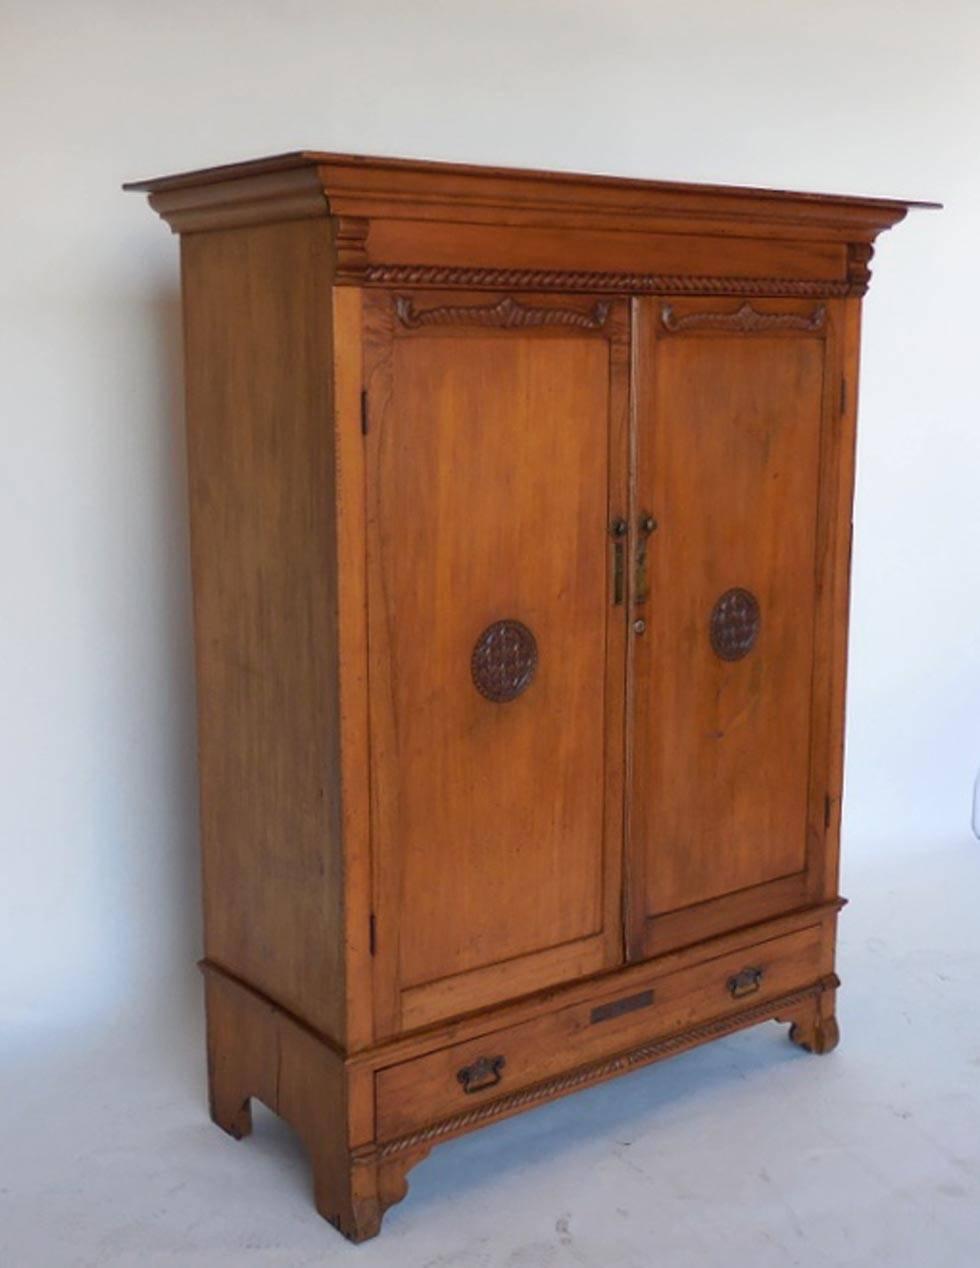 Cedro (tropical hardwood) cabinet or wardrobe with Asian inspired carved designs on doors. Interior features four shelves and two drawers. Shows normal signs of wear considering its age but is fully functional and sturdy. Doors work well. Inside of